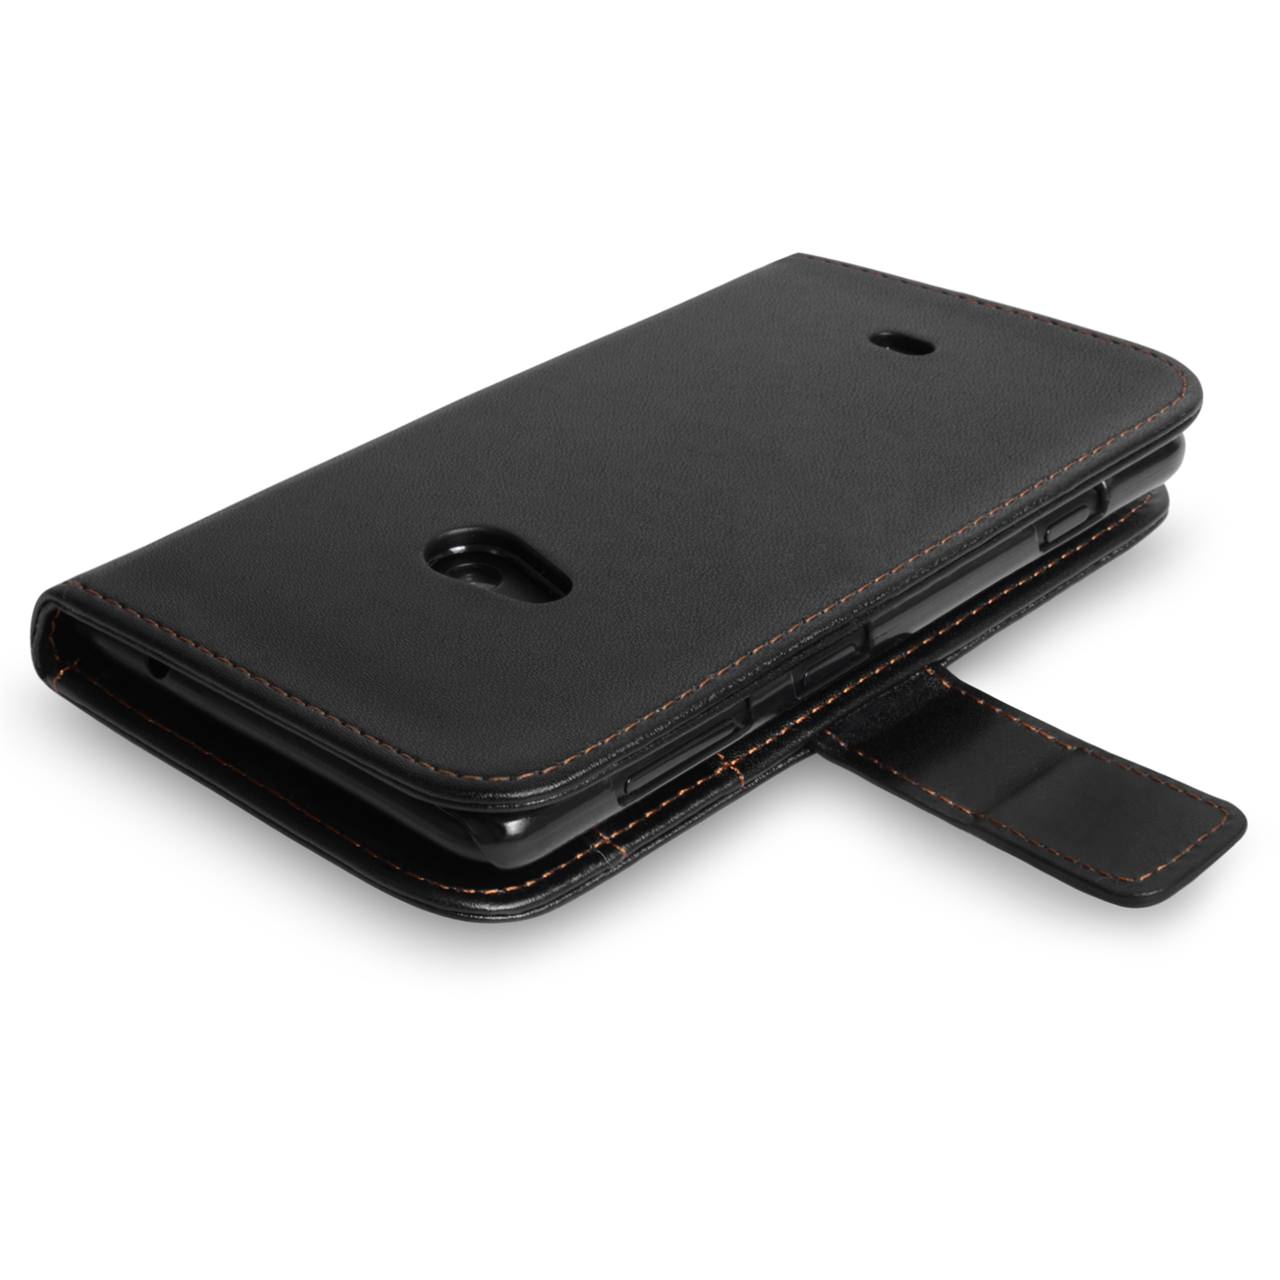 YouSave Accessories Nokia Lumia 625 Leather Effect Wallet Case - Black